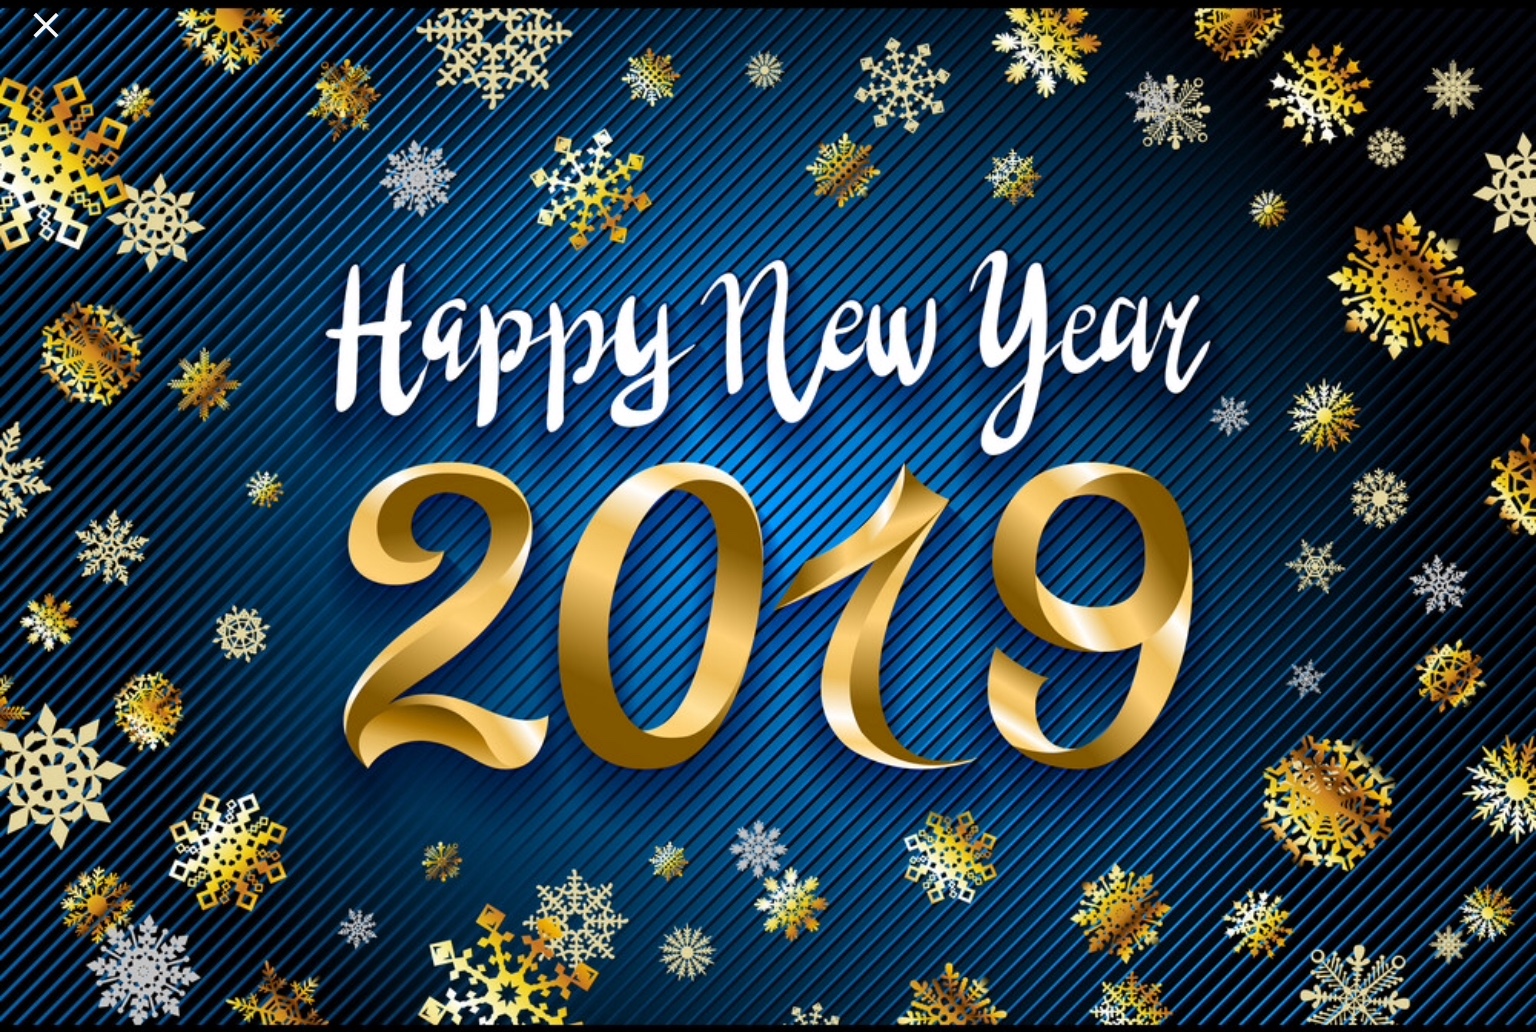 Happy New Year from Kimmons Roofing!